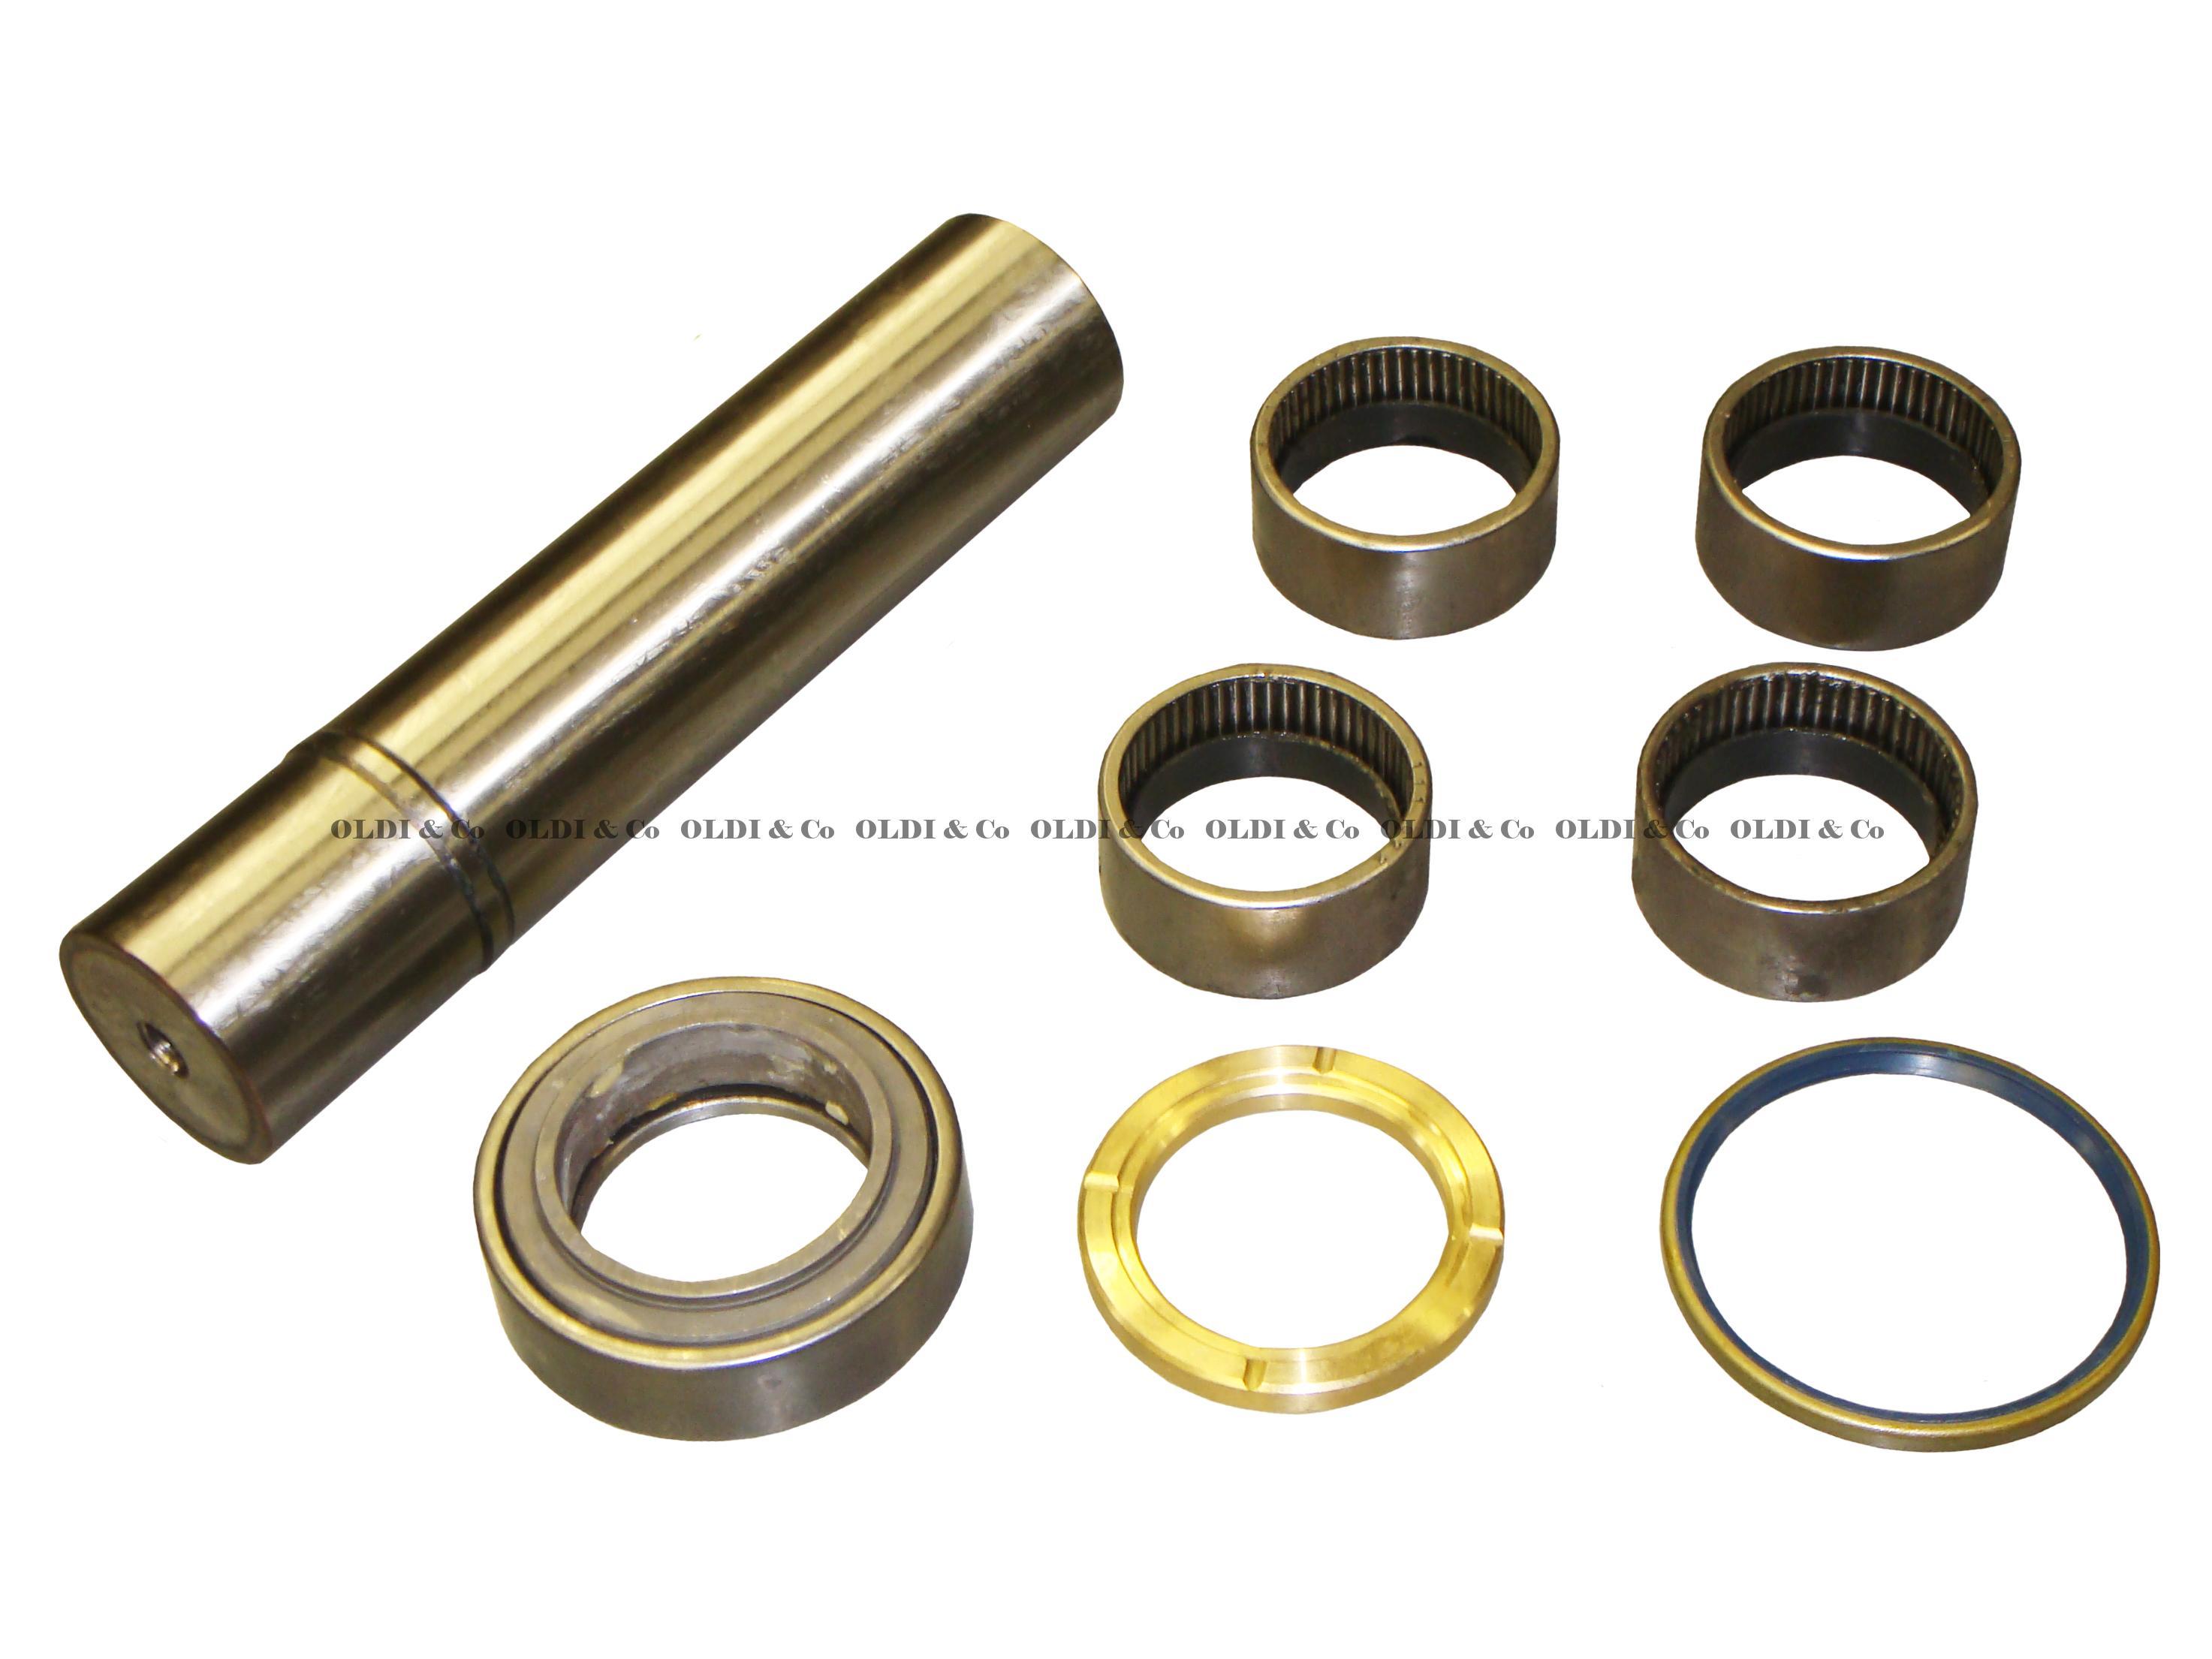 34.074.17418 Suspension parts → King pin - steering knuckle rep. kit